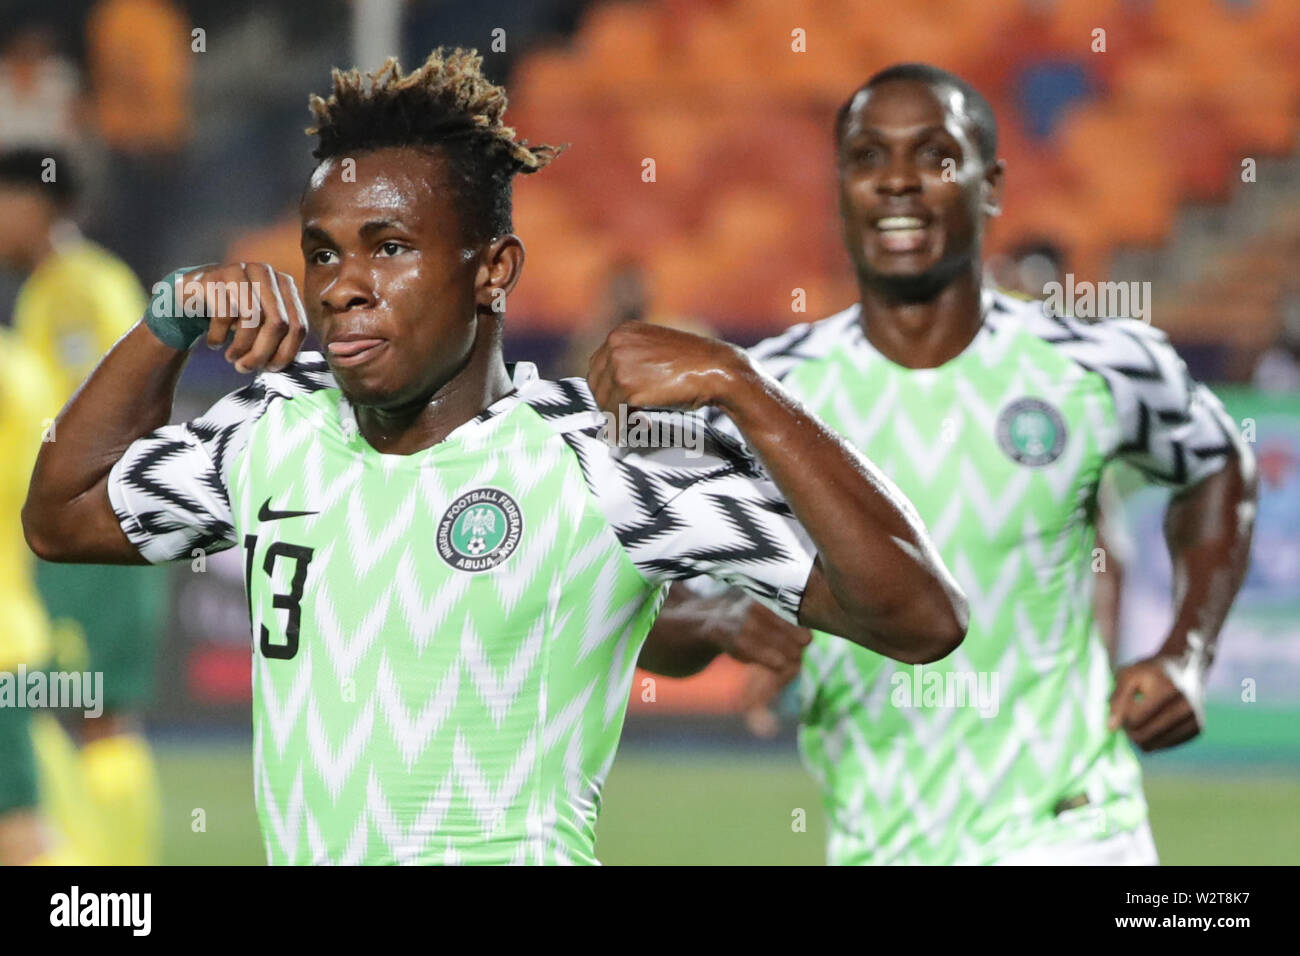 Cairo, Egypt. 10th July, 2019. Nigeria's Samuel Chukwueze (L) celebrates scoring his side's first goal during the 2019 Africa Cup of Nations quarter final soccer match between Nigeria and South Africa at the Cairo International Stadium. Credit: Oliver Weiken/dpa/Alamy Live News Stock Photo